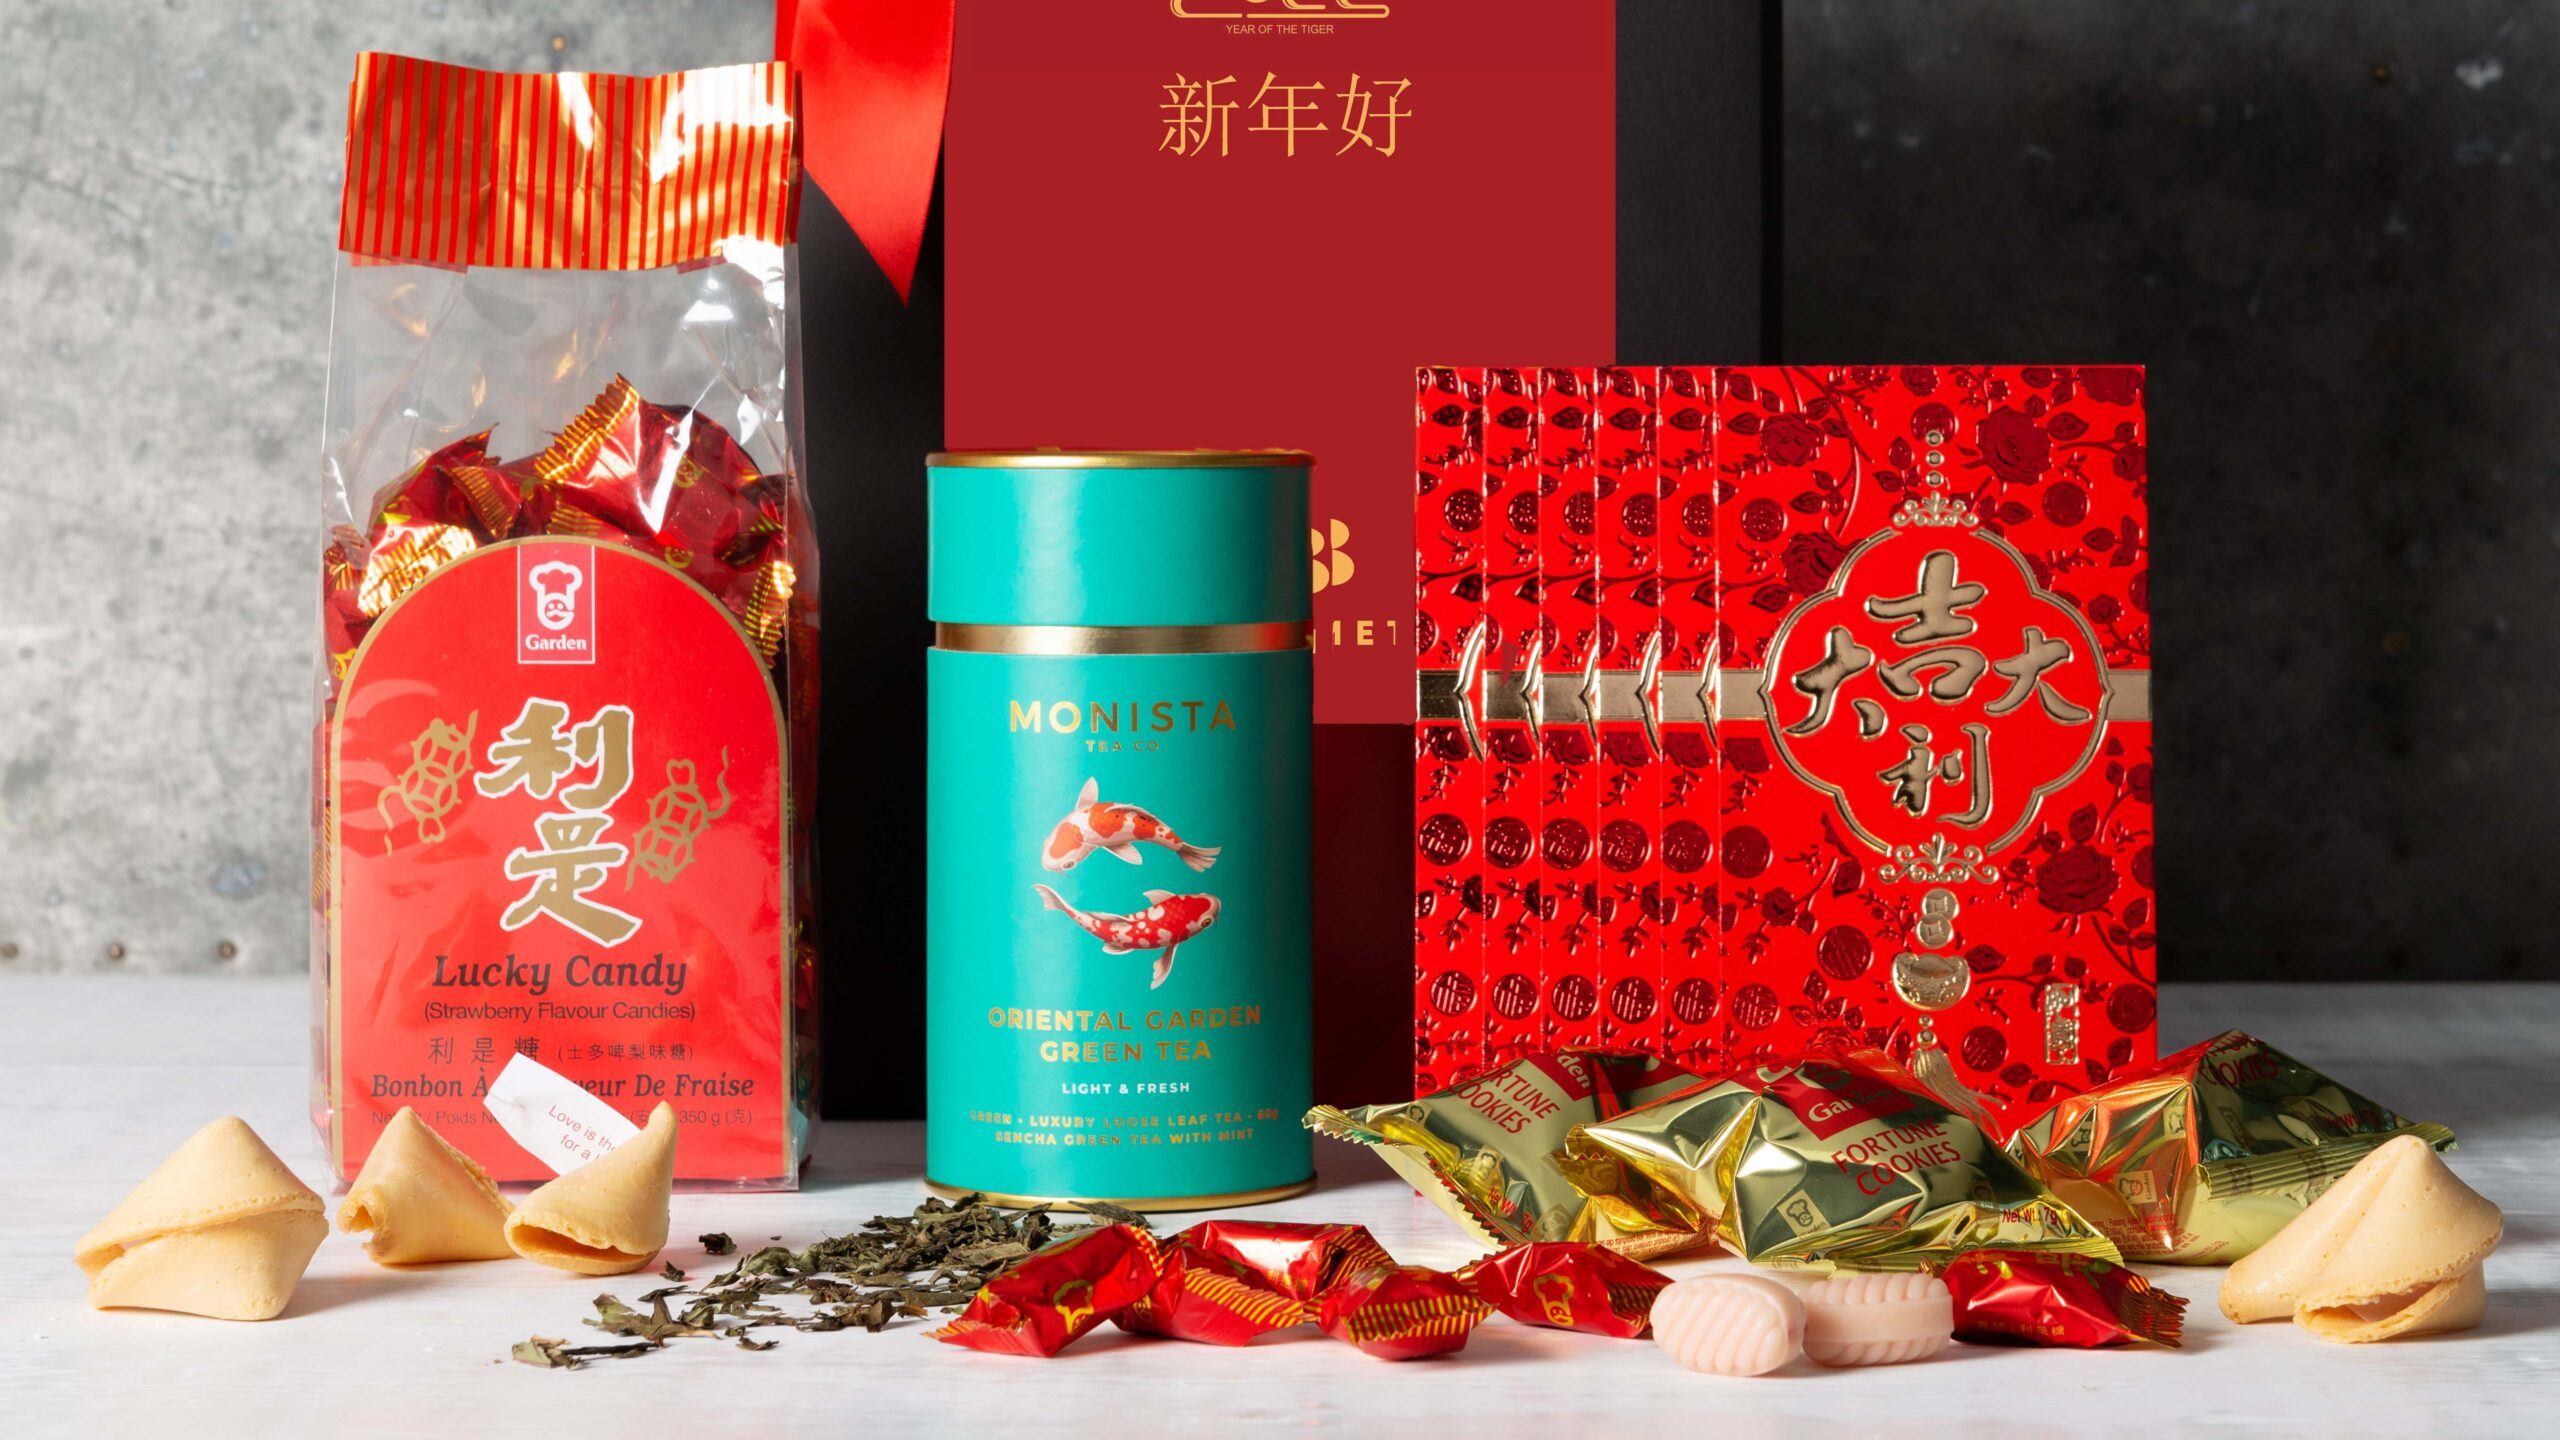 The Everlasting Fortune hamper is the perfect gift for that family member who won't be present to celebrate lunar new year